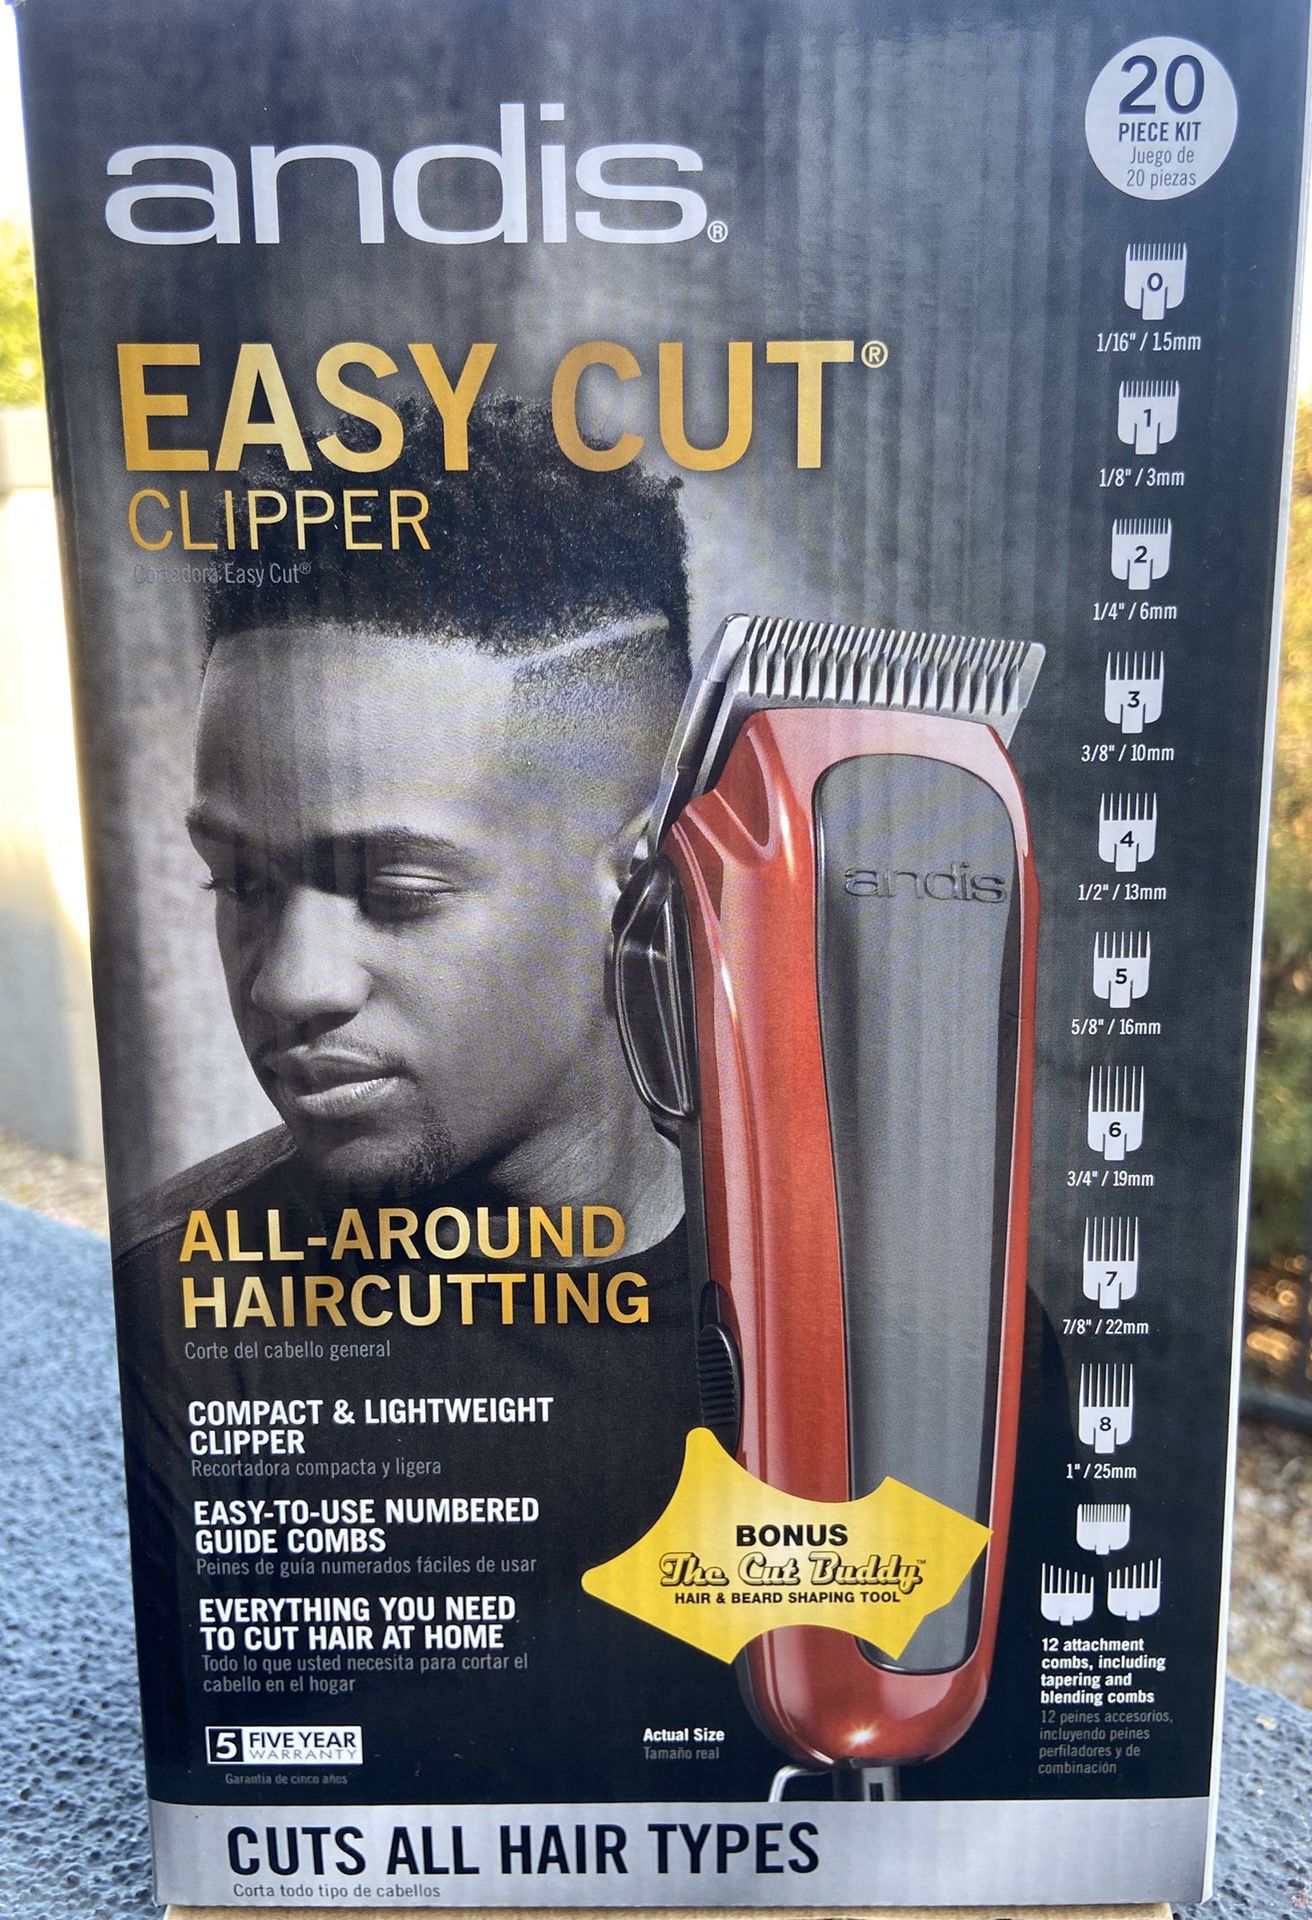 BRAND NEW Men’s Andis Easy Cut Hair Clippers